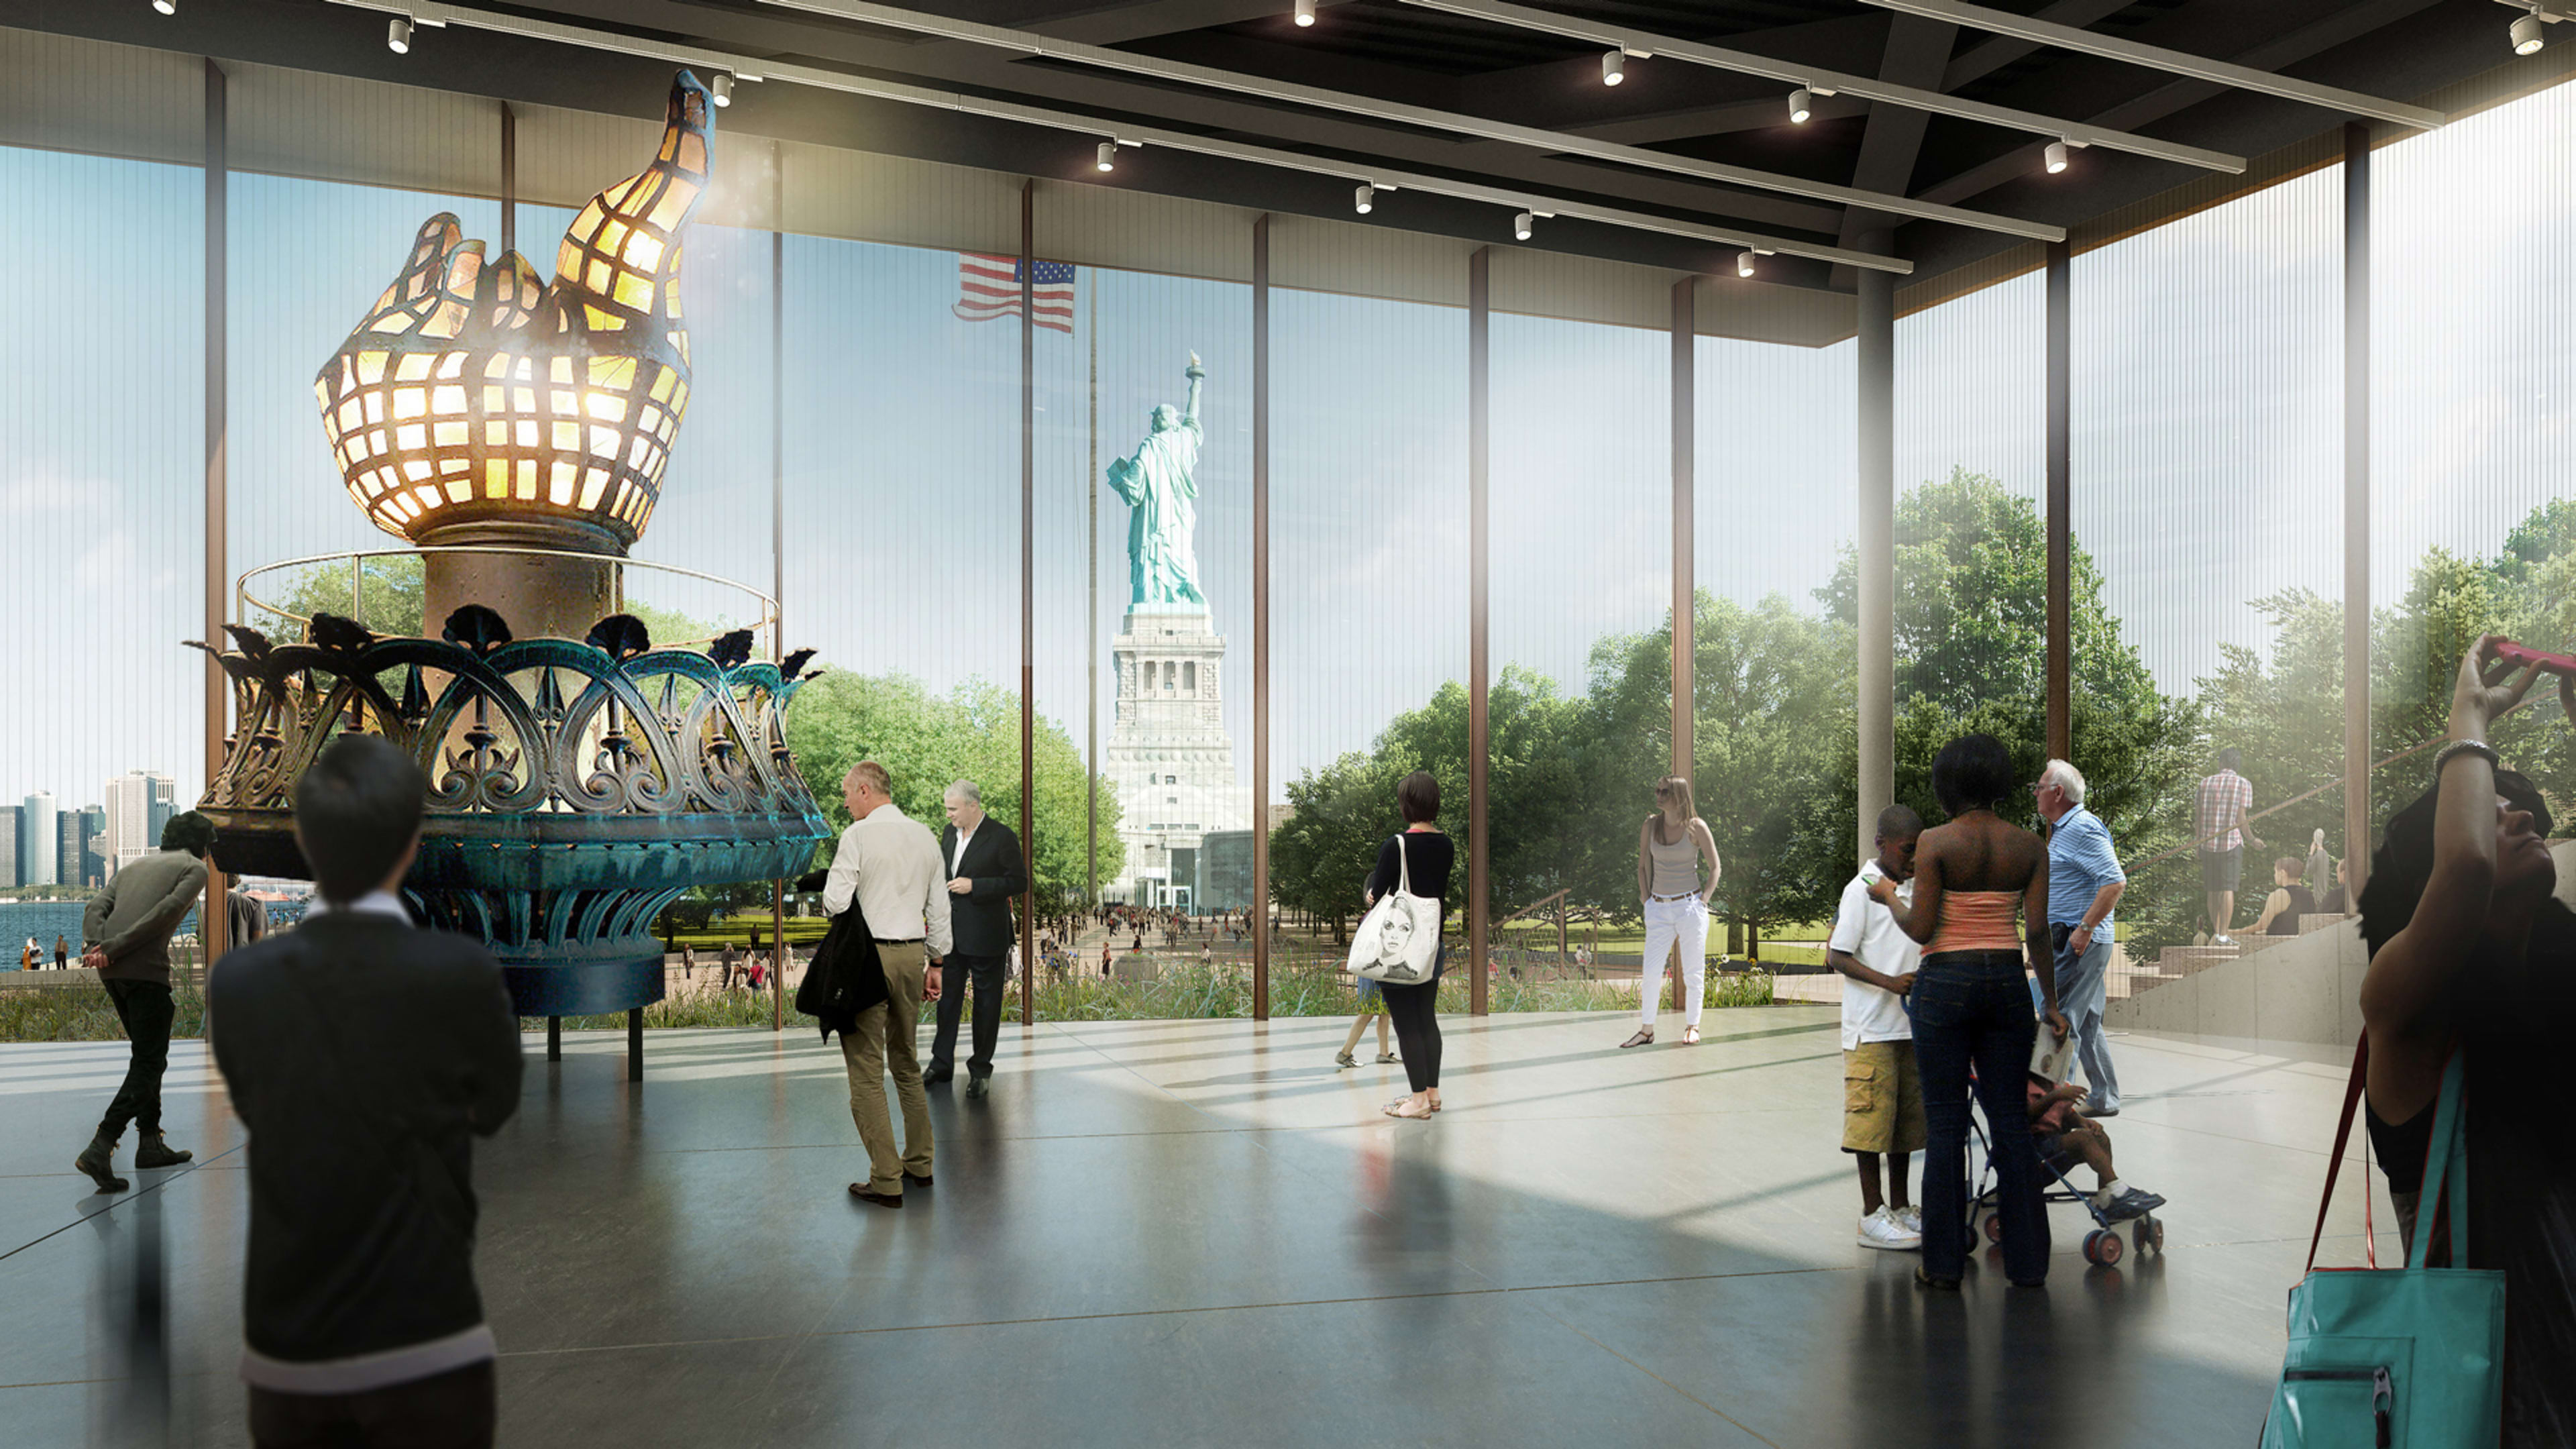 Every American should visit the new Statue of Liberty Museum